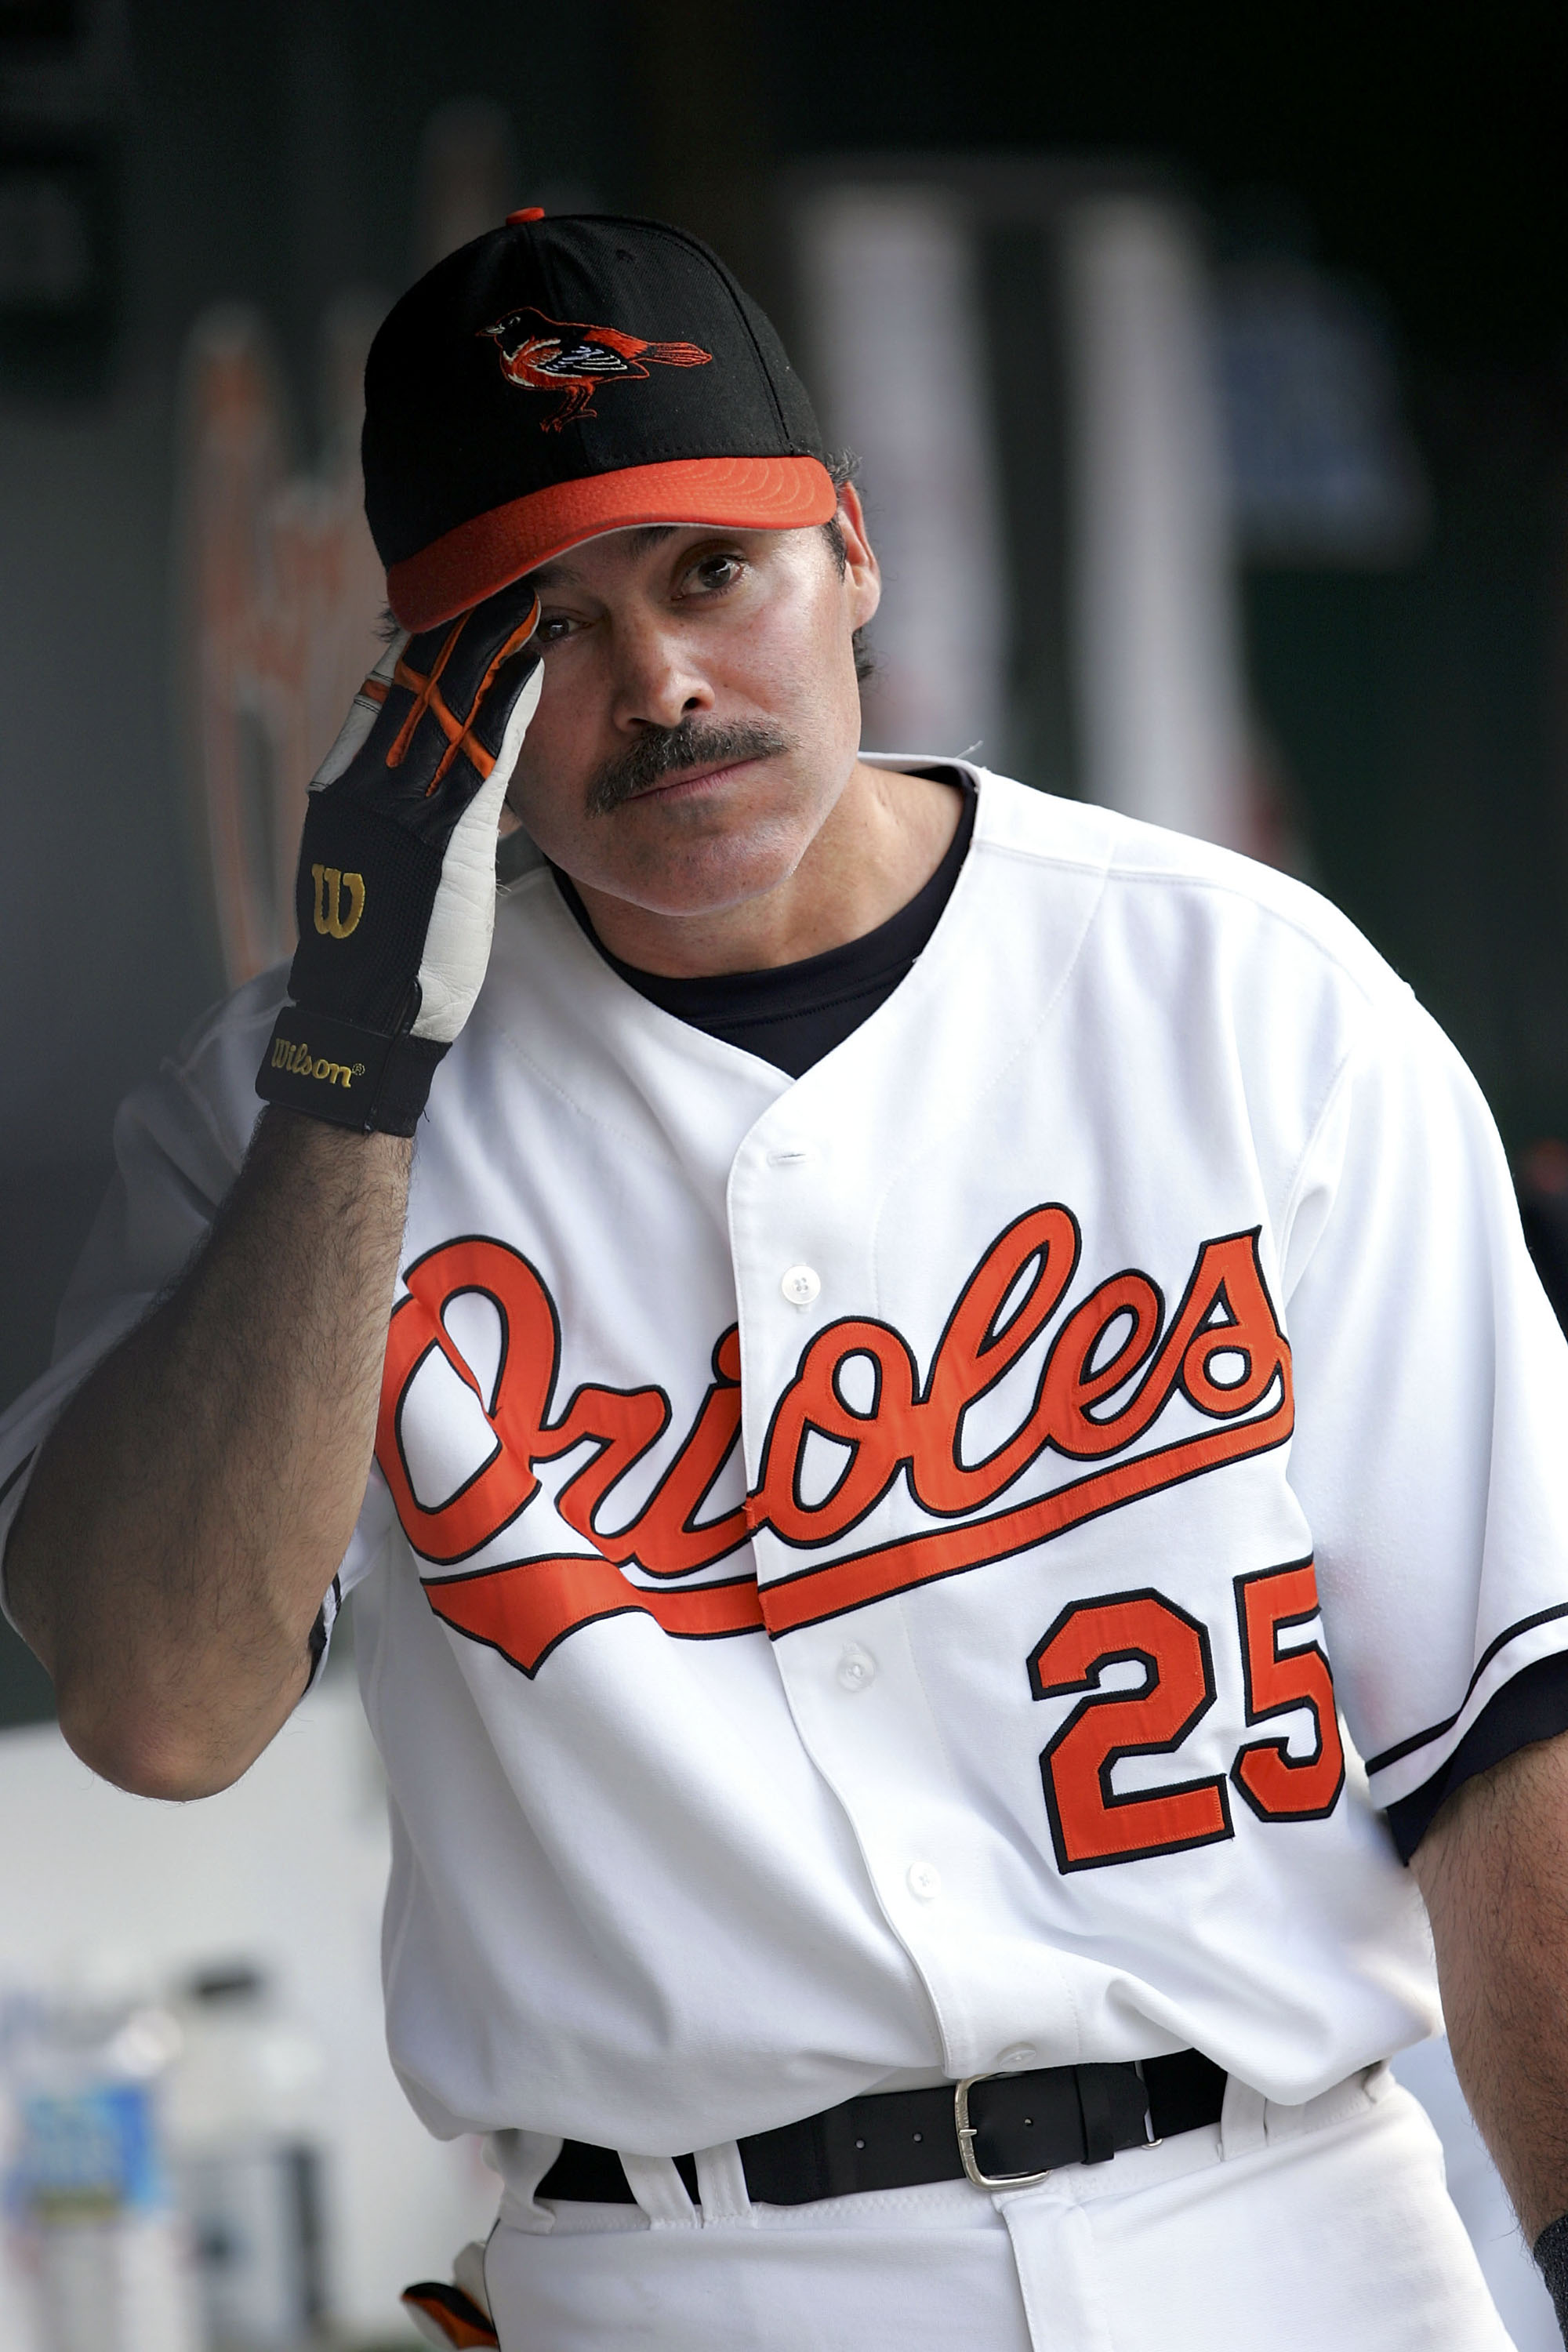 BALTIMORE, MD - AUGUST 29: Rafael Palmiero #25 of the Baltimore Orioles watches from the dugout during the game against the Oakland Athletics on August 29, 2005 at Camden Yards in Baltimore, Maryland.  (Photo By Jamie Squire/Getty Images)